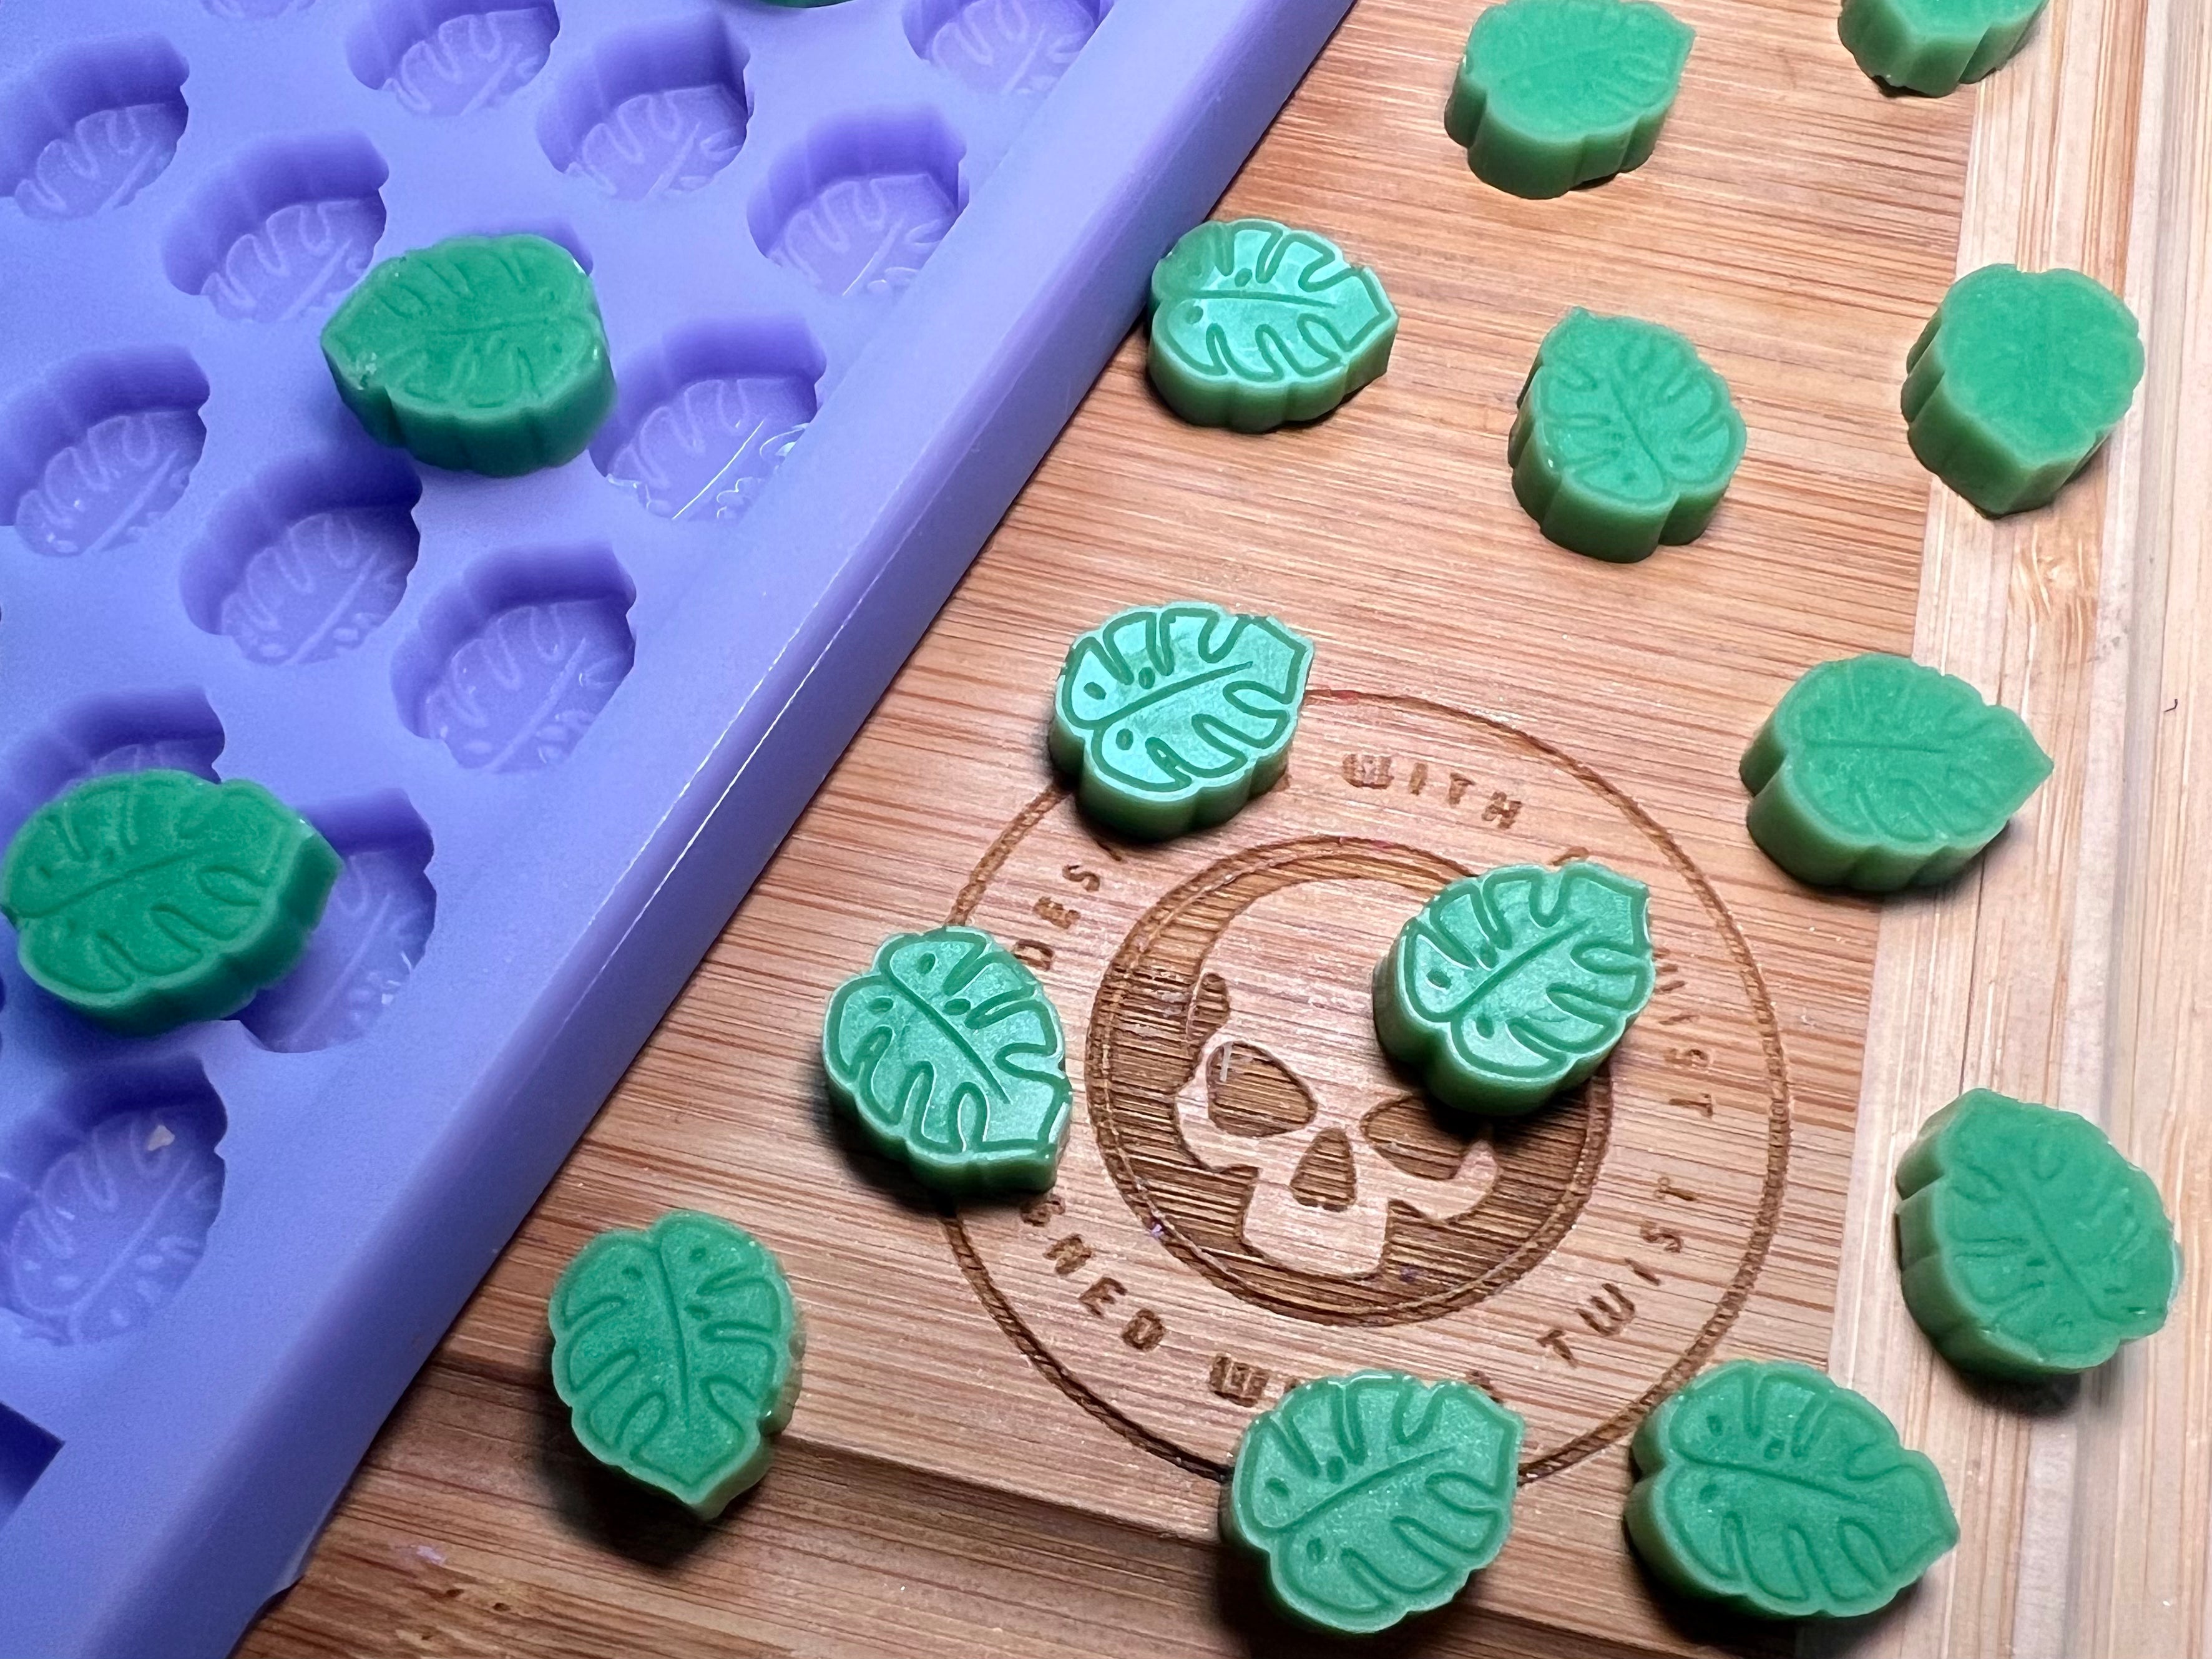 Monstera Scrape n Scoop Wax Silicone Mold - Designed with a Twist - Top quality silicone molds made in the UK.